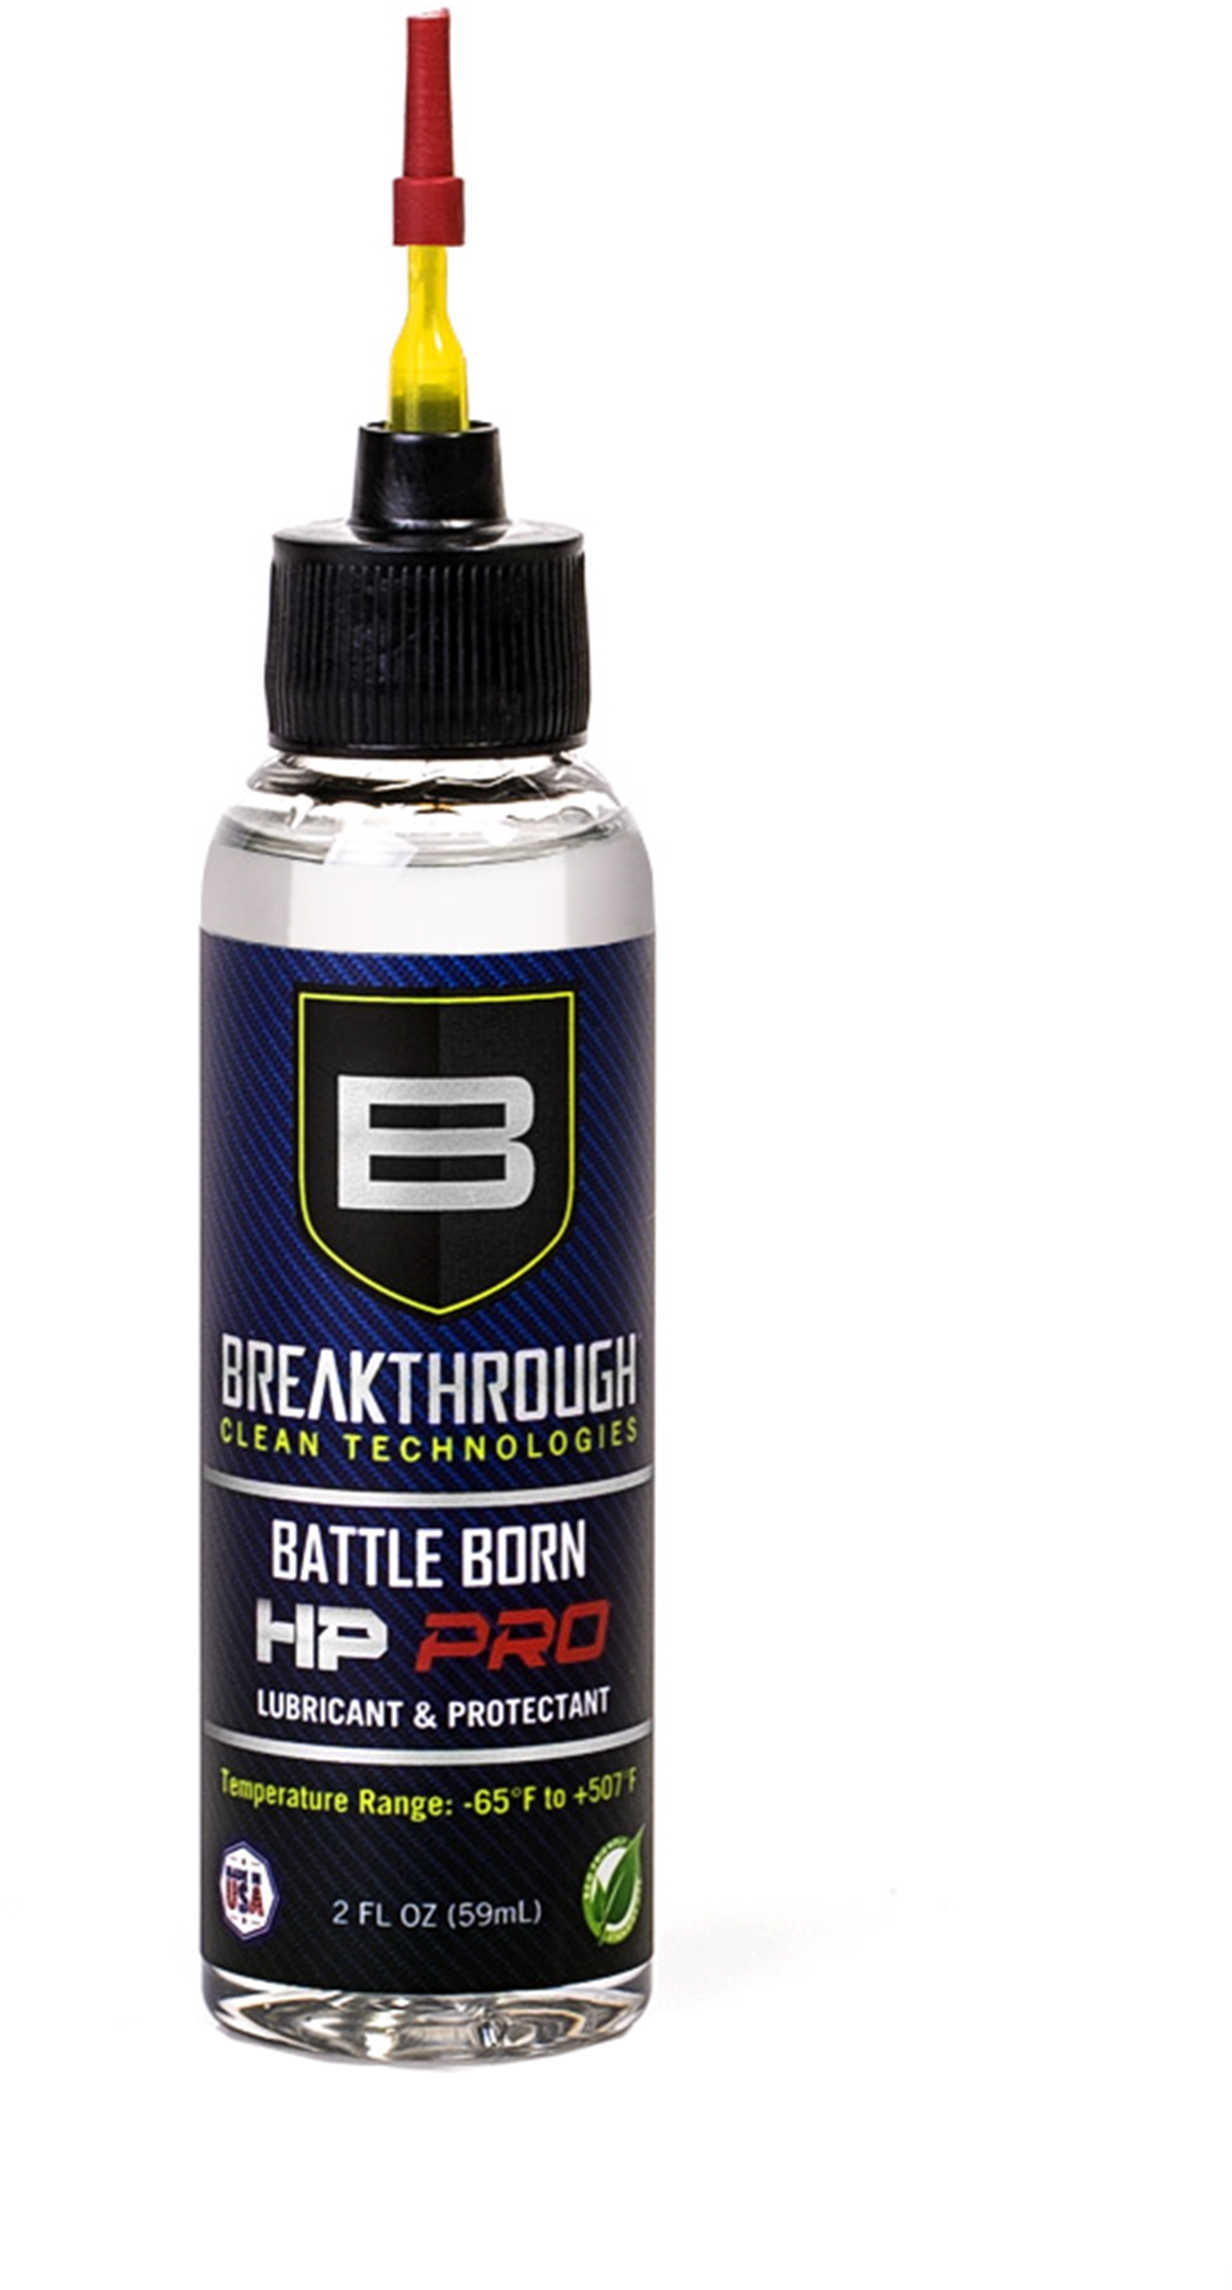 Breakthrough Clean Technologies Battle Born HP Pro Lubricant And Protectant 2 Oz Bottle Clear With Needle Tip Applicator